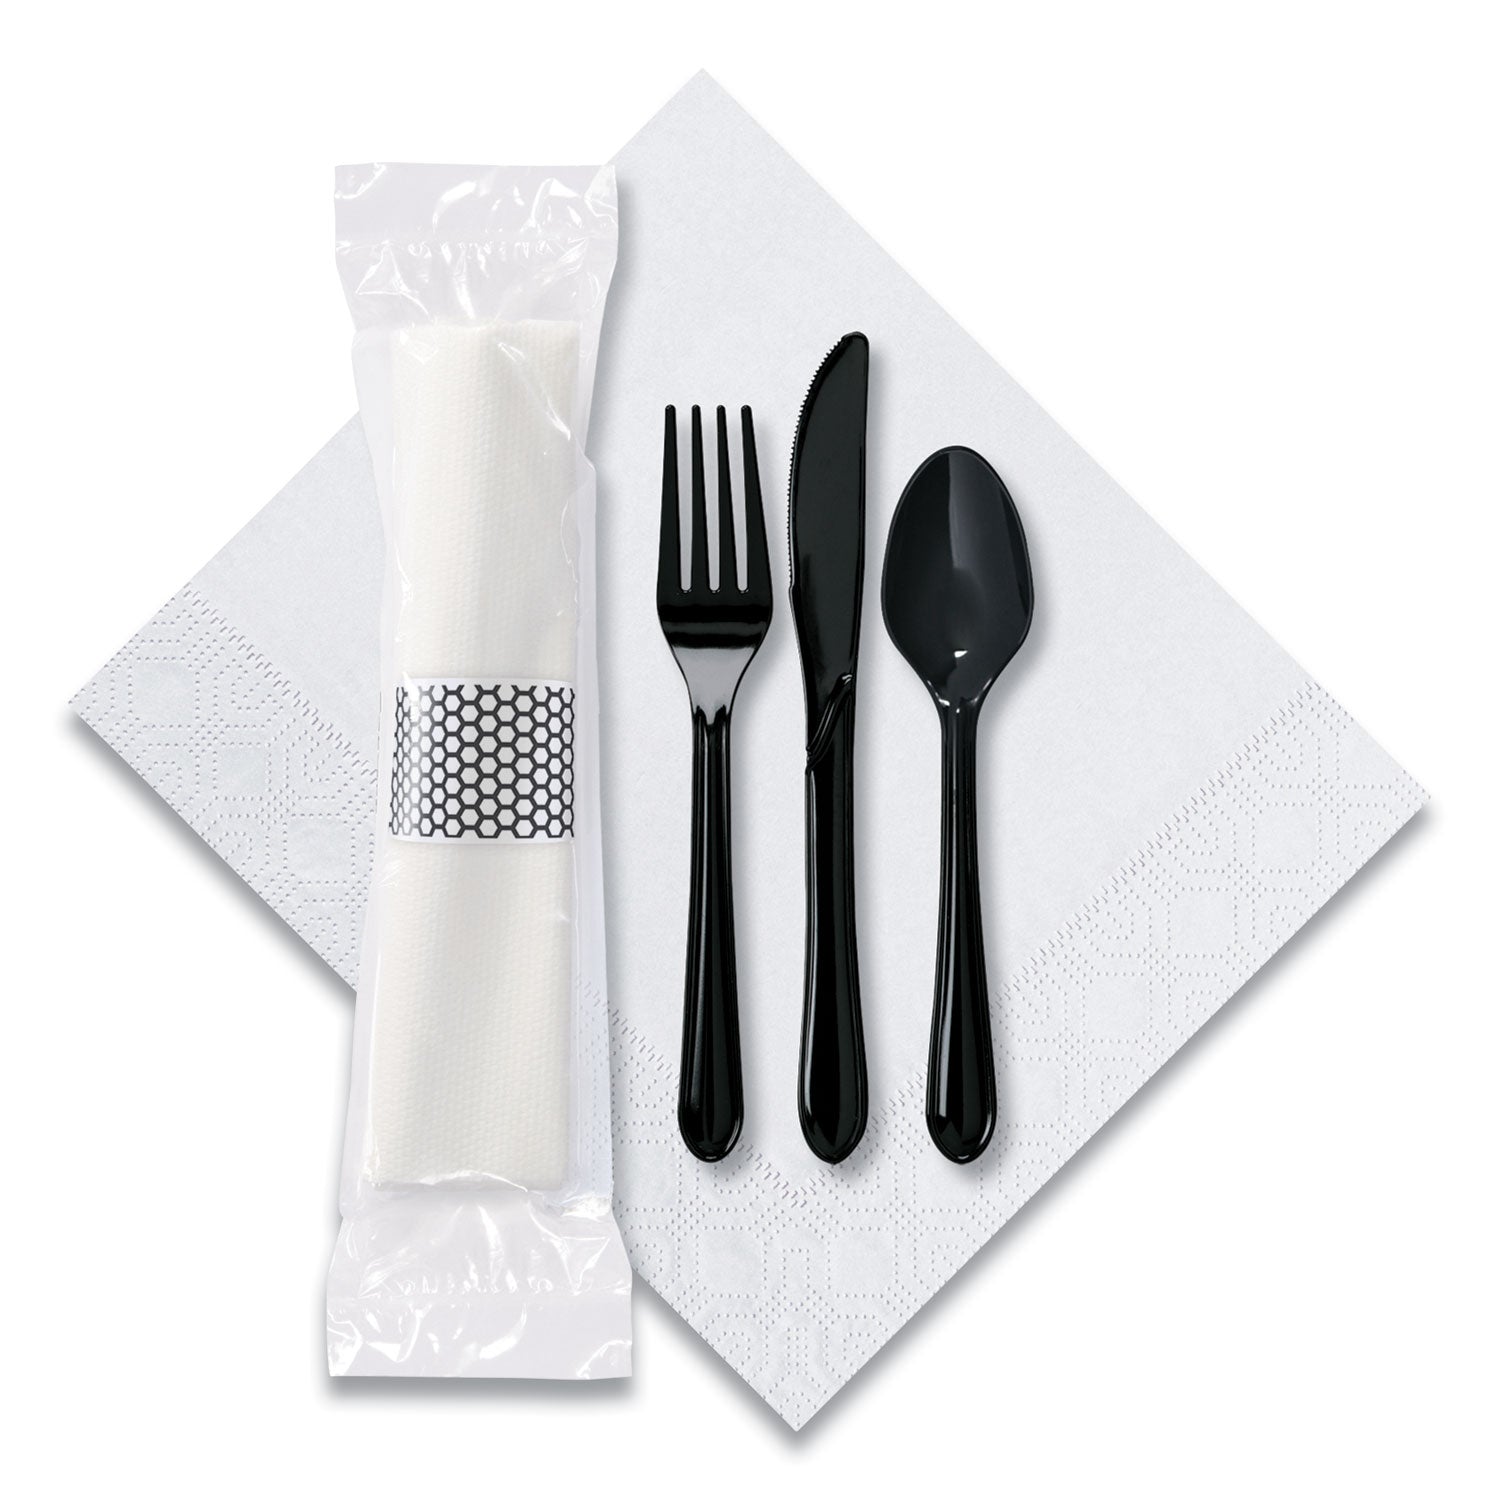 caterwrap-cater-to-go-express-cutlery-kit-fork-knife-spoon-napkin-black-100-carton_hfm119901 - 1